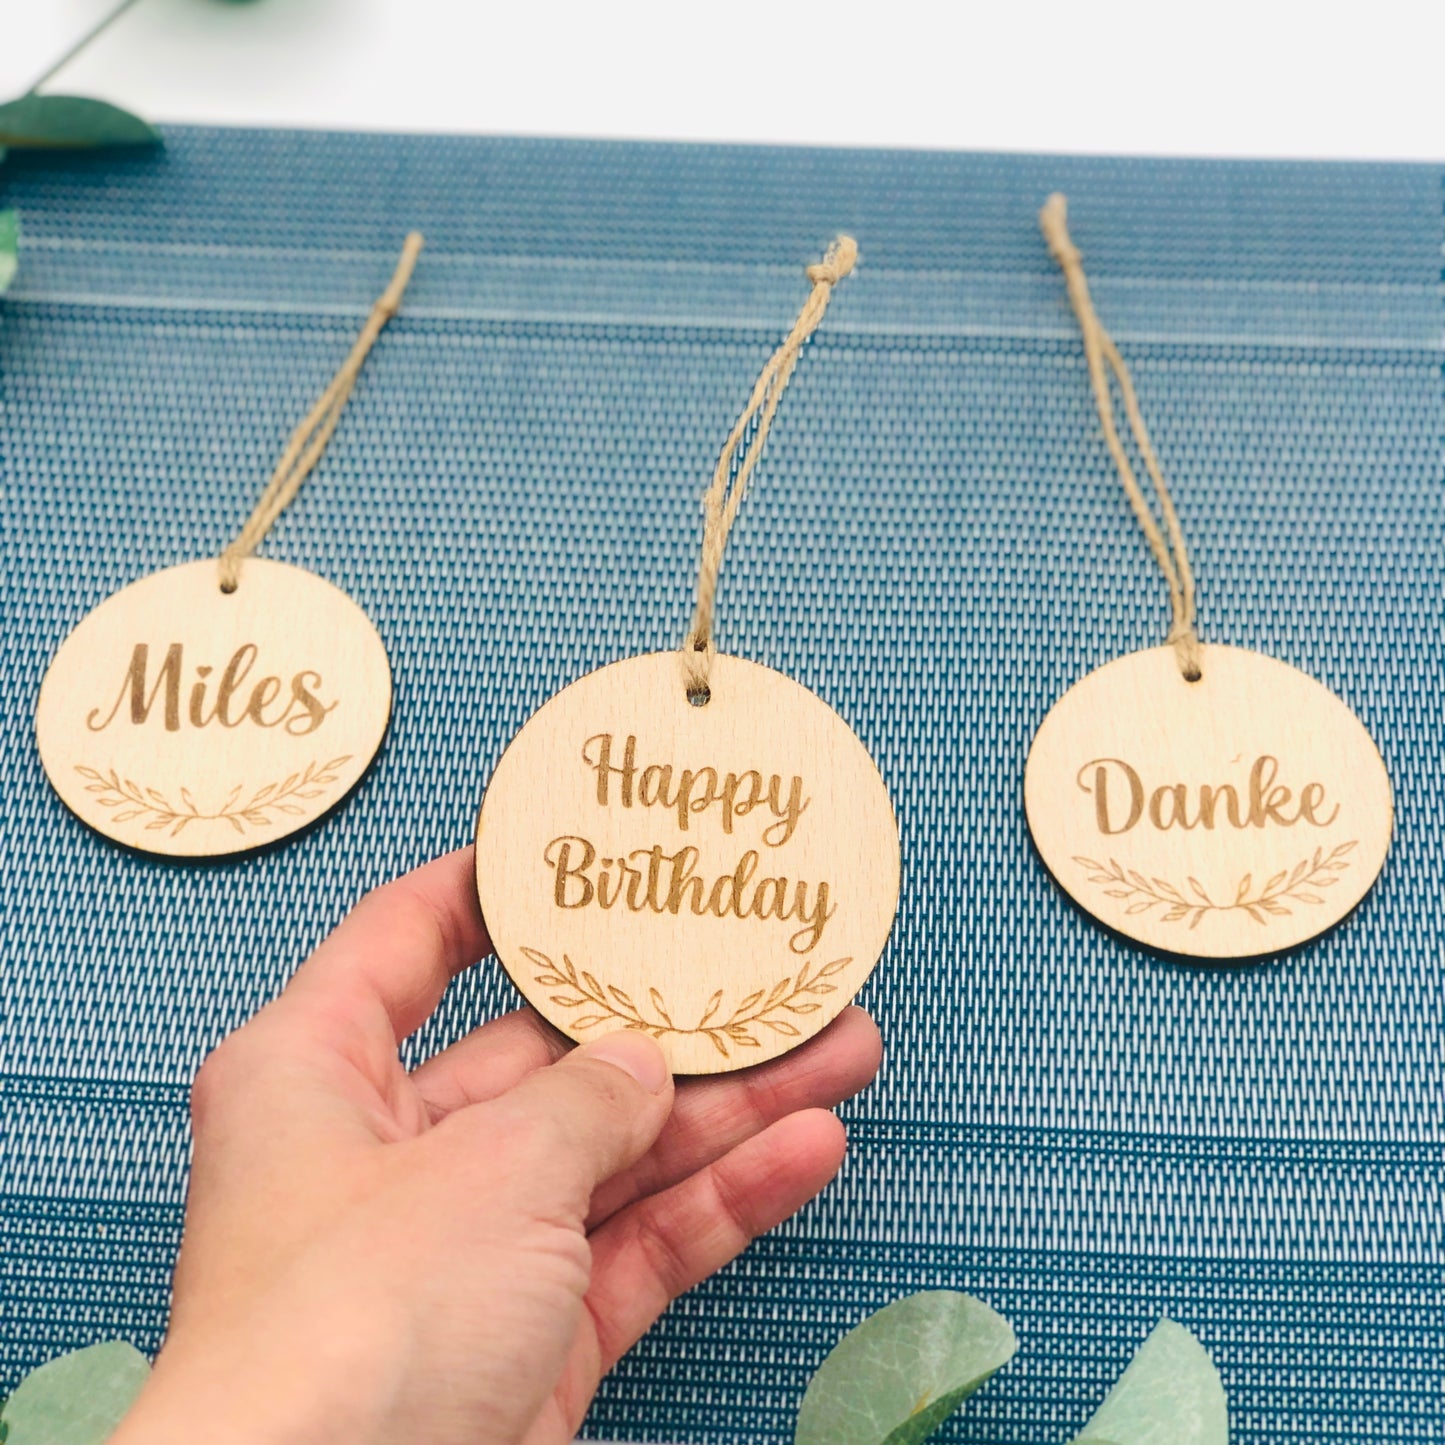 Round wooden gift tag - thank you tag - personalized round wooden gift tag